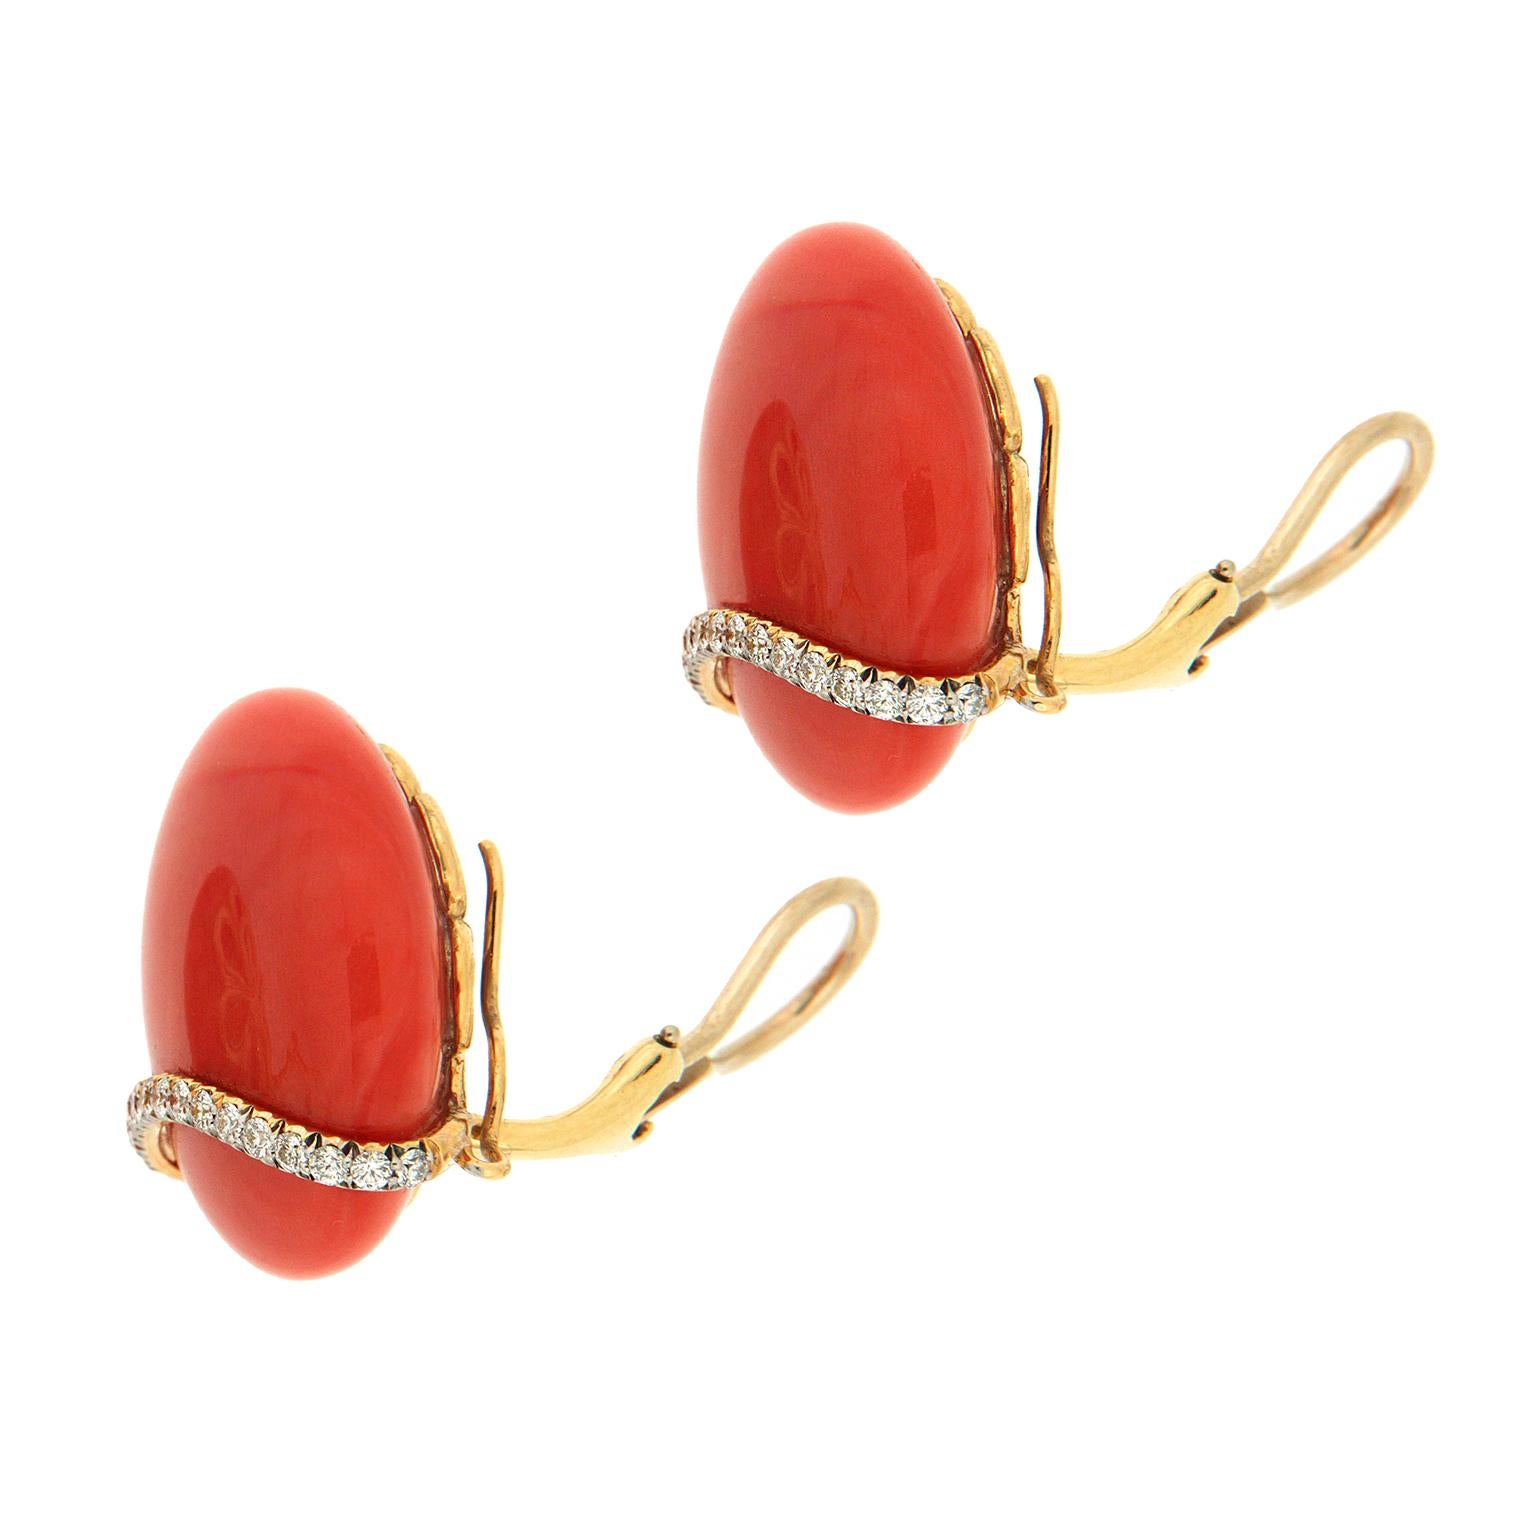 Ocean and earth come together in these earrings. Red coral representing the sea is carved into 25mm round cabochons and polished until gleaming. Round brilliant cut diamonds are the land element, mounted in a curved line across the coral. The